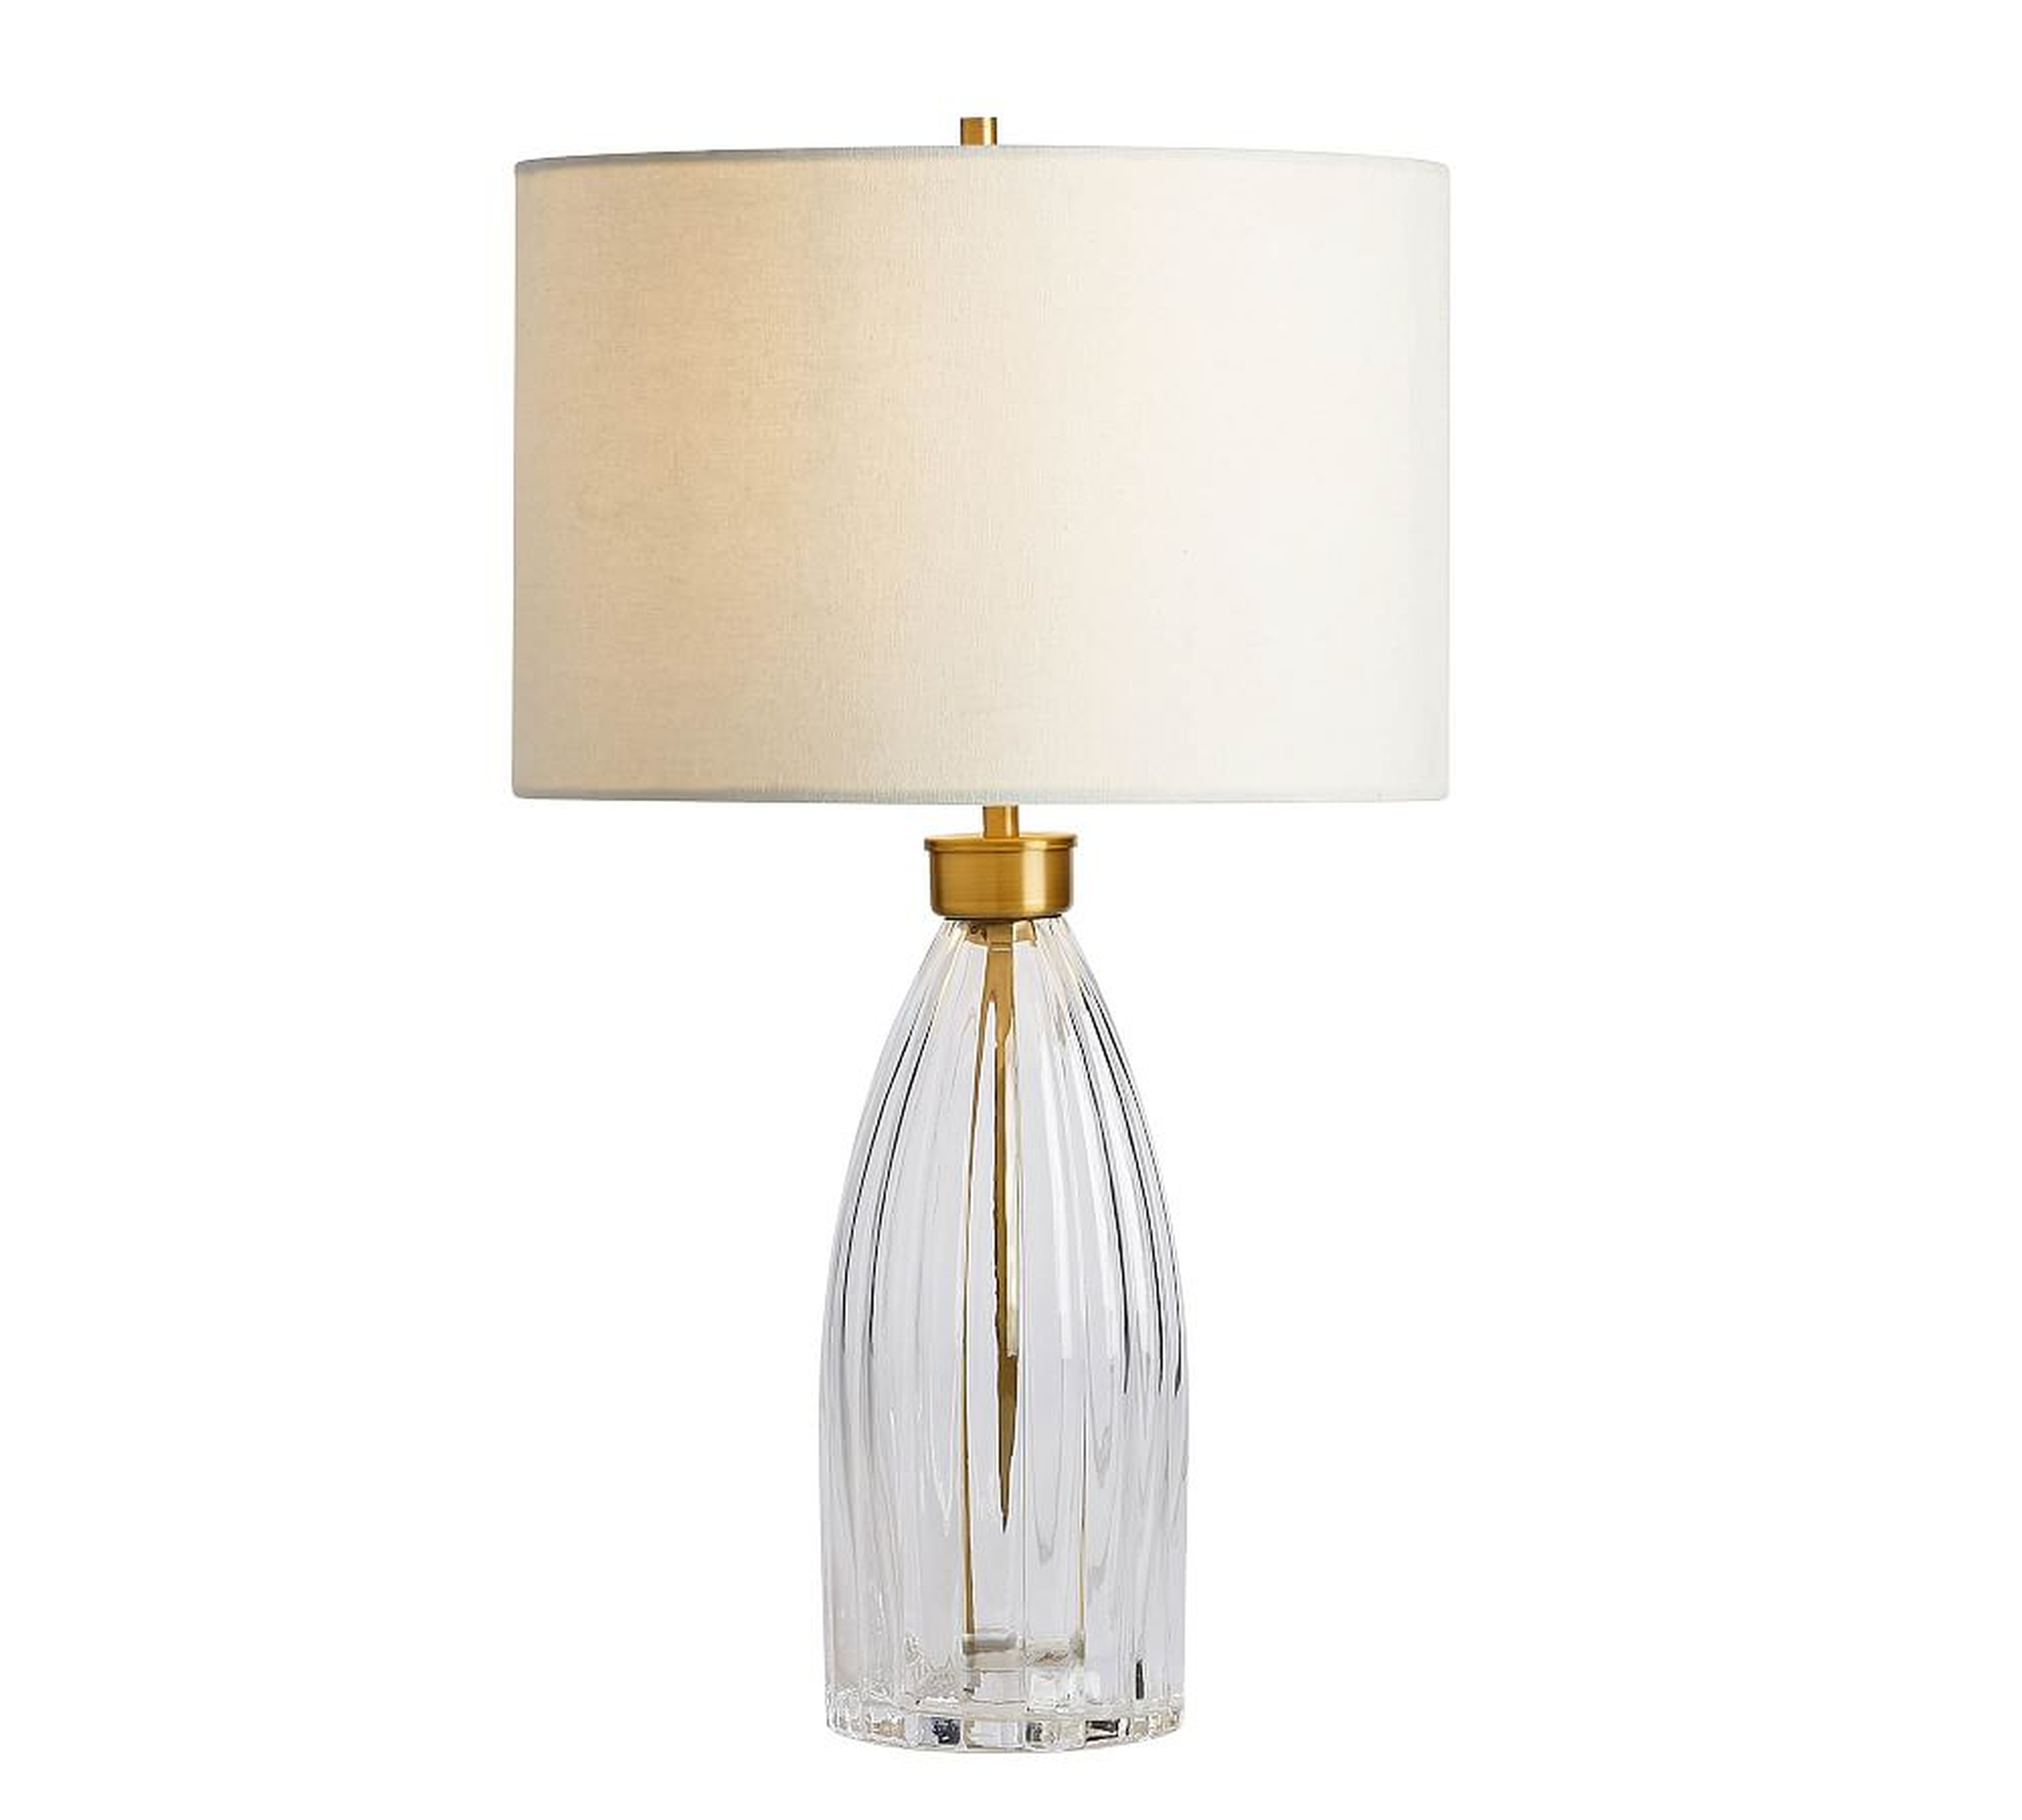 Maggie Glass Table Lamp, 23", Antique Brass &amp; Glass Base With Small Gallery SS Shade, White - Pottery Barn